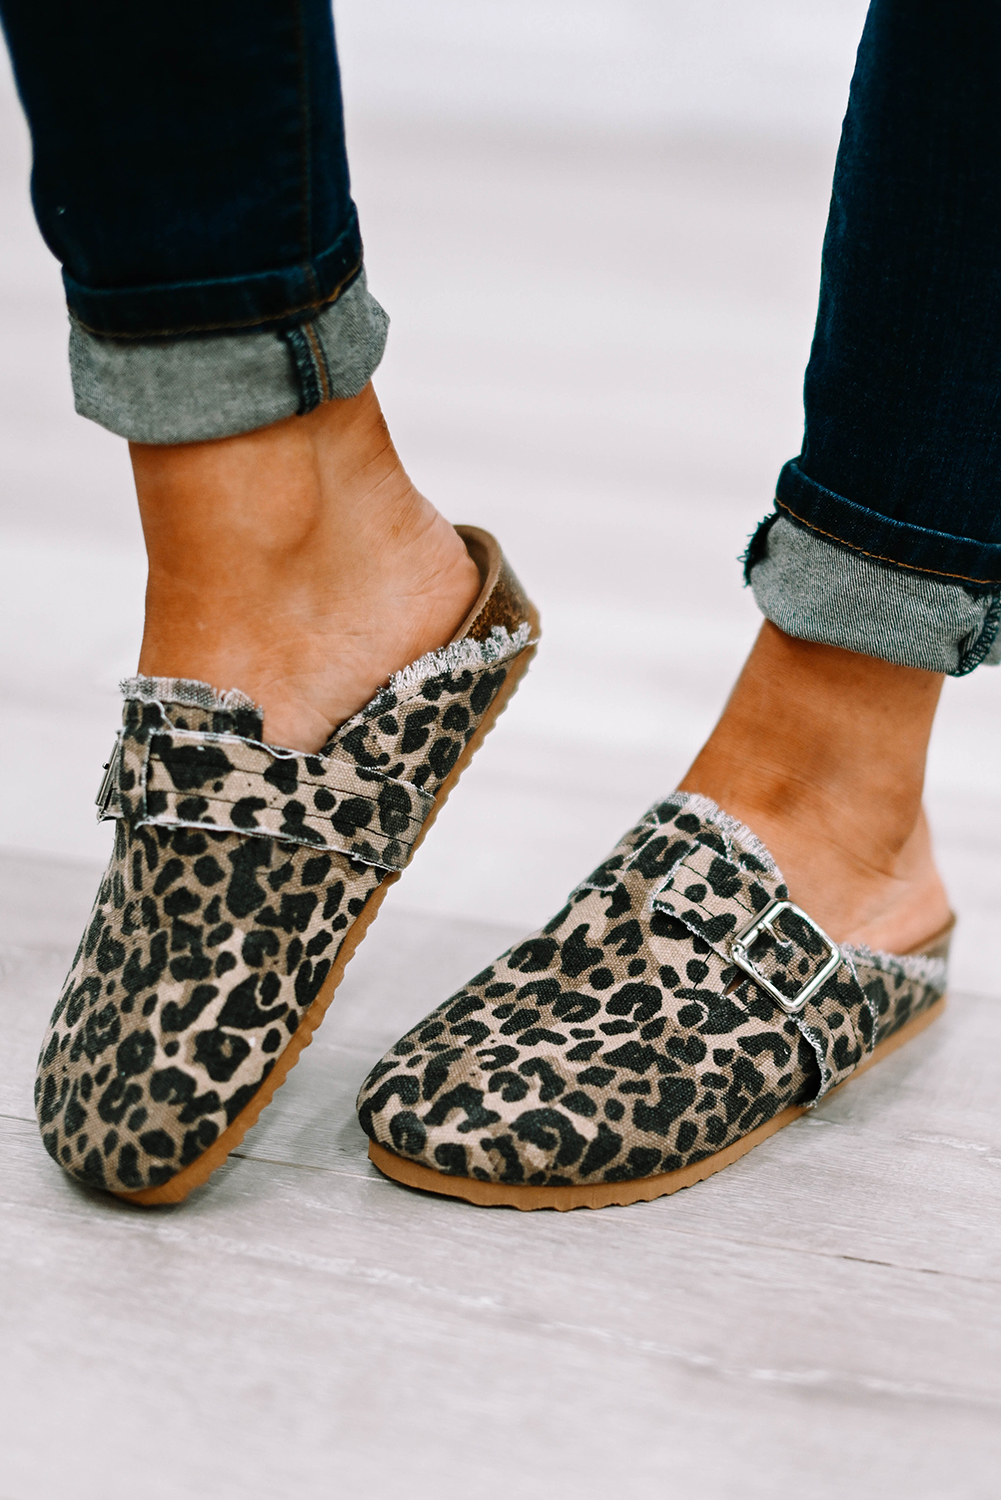 Dropshipping Cheetah Buckle Strap Frayed Canvas Slip On SLIPPERS